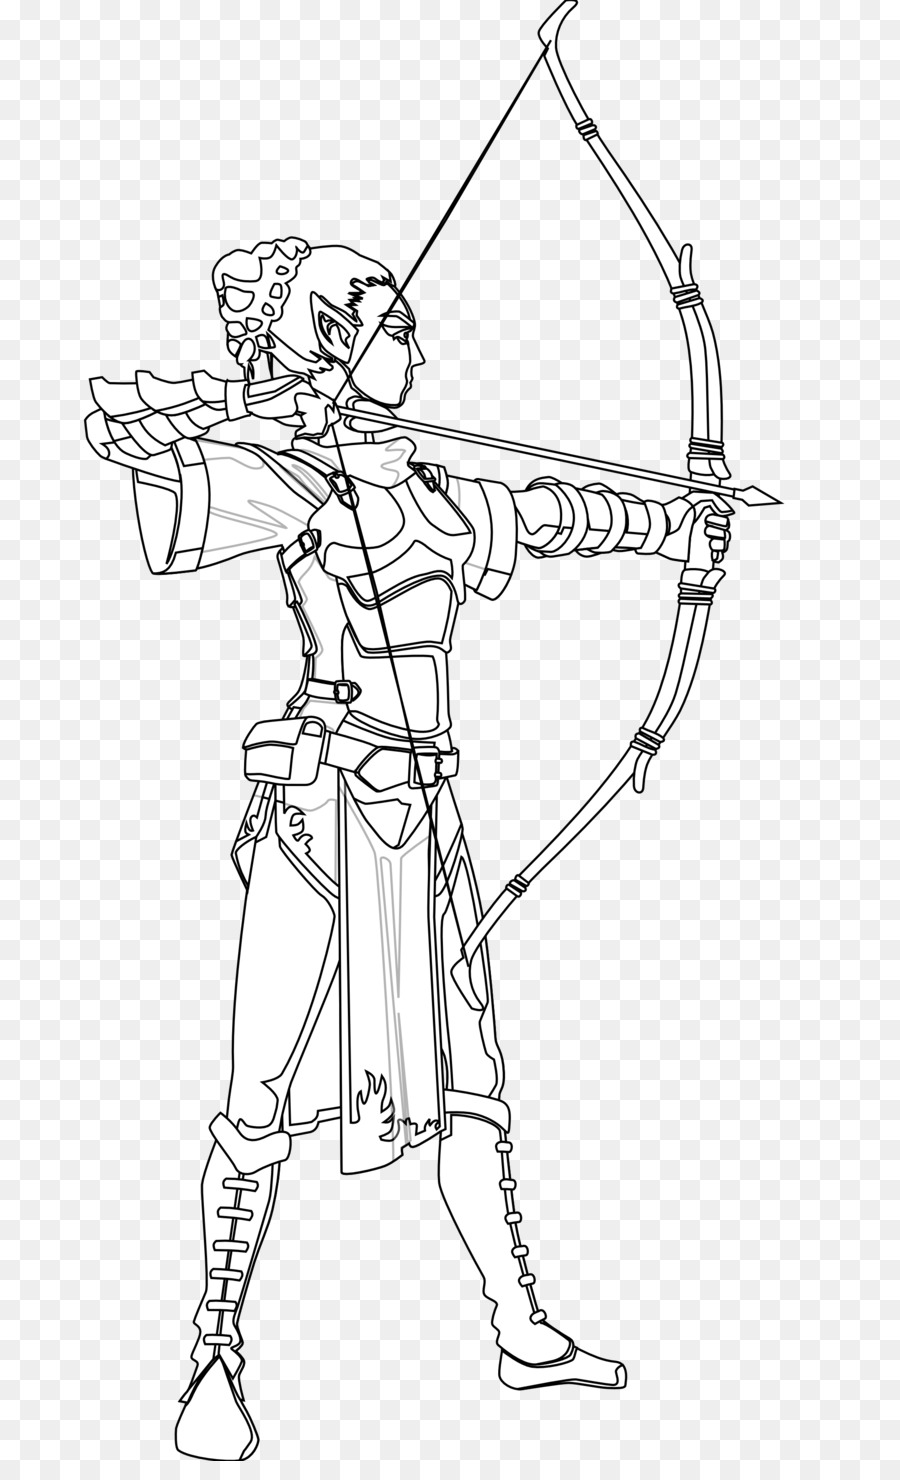 Drawing archery coloring book. Archer clipart black and white